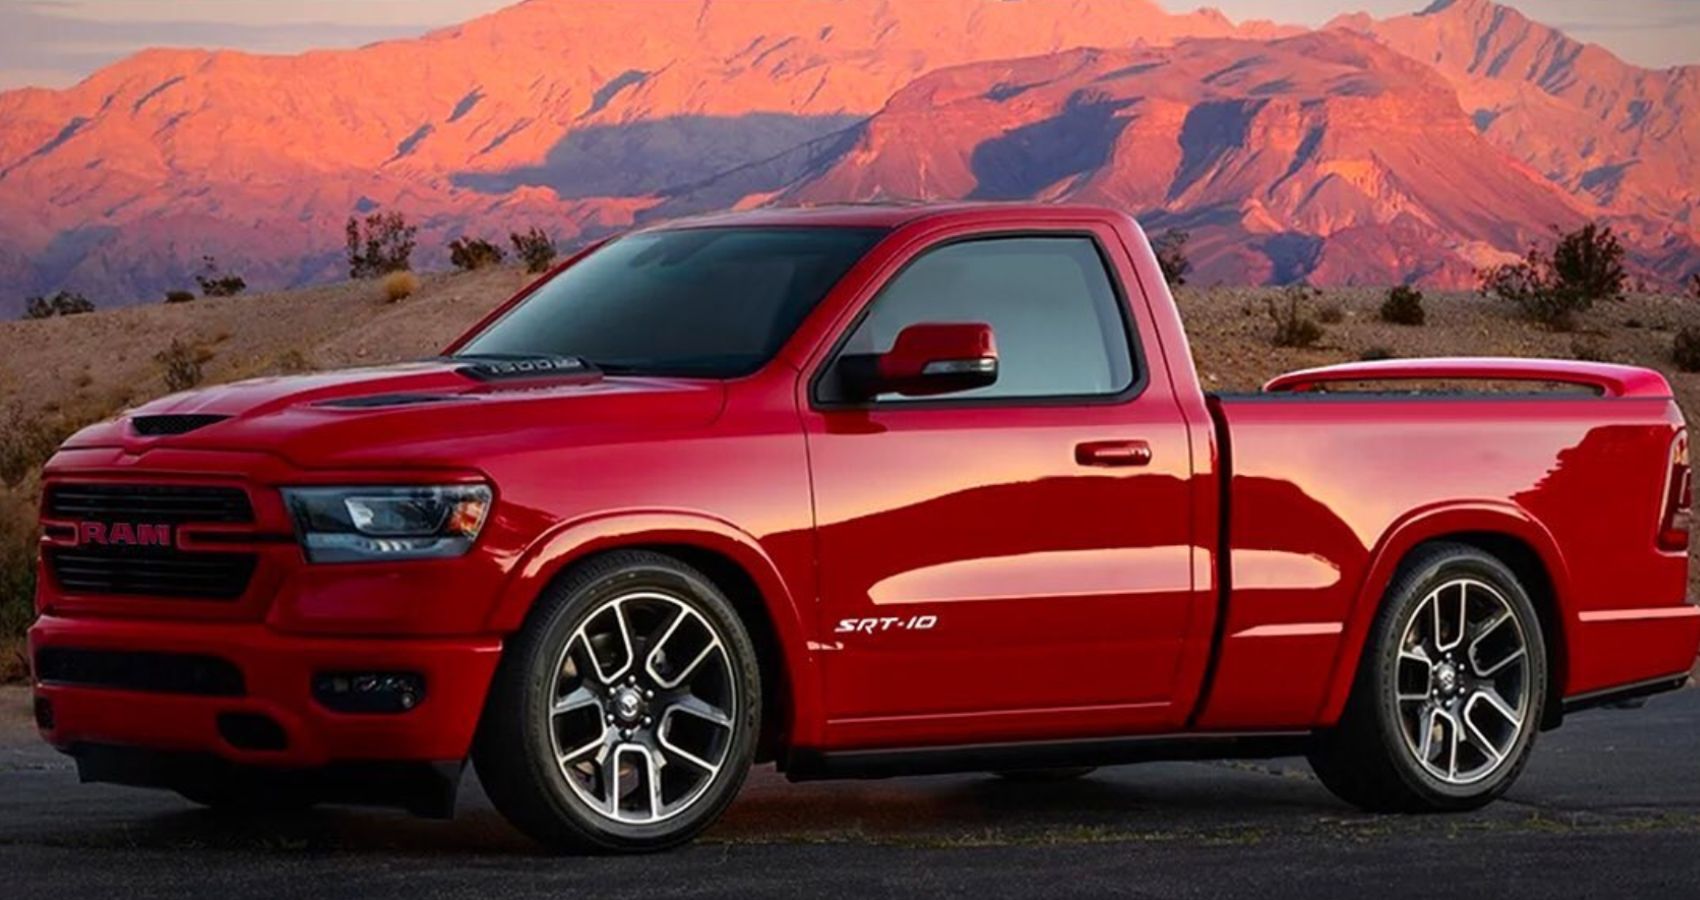 We Really Want To See This Awesome Custom RAM SRT10 To Be Produced For